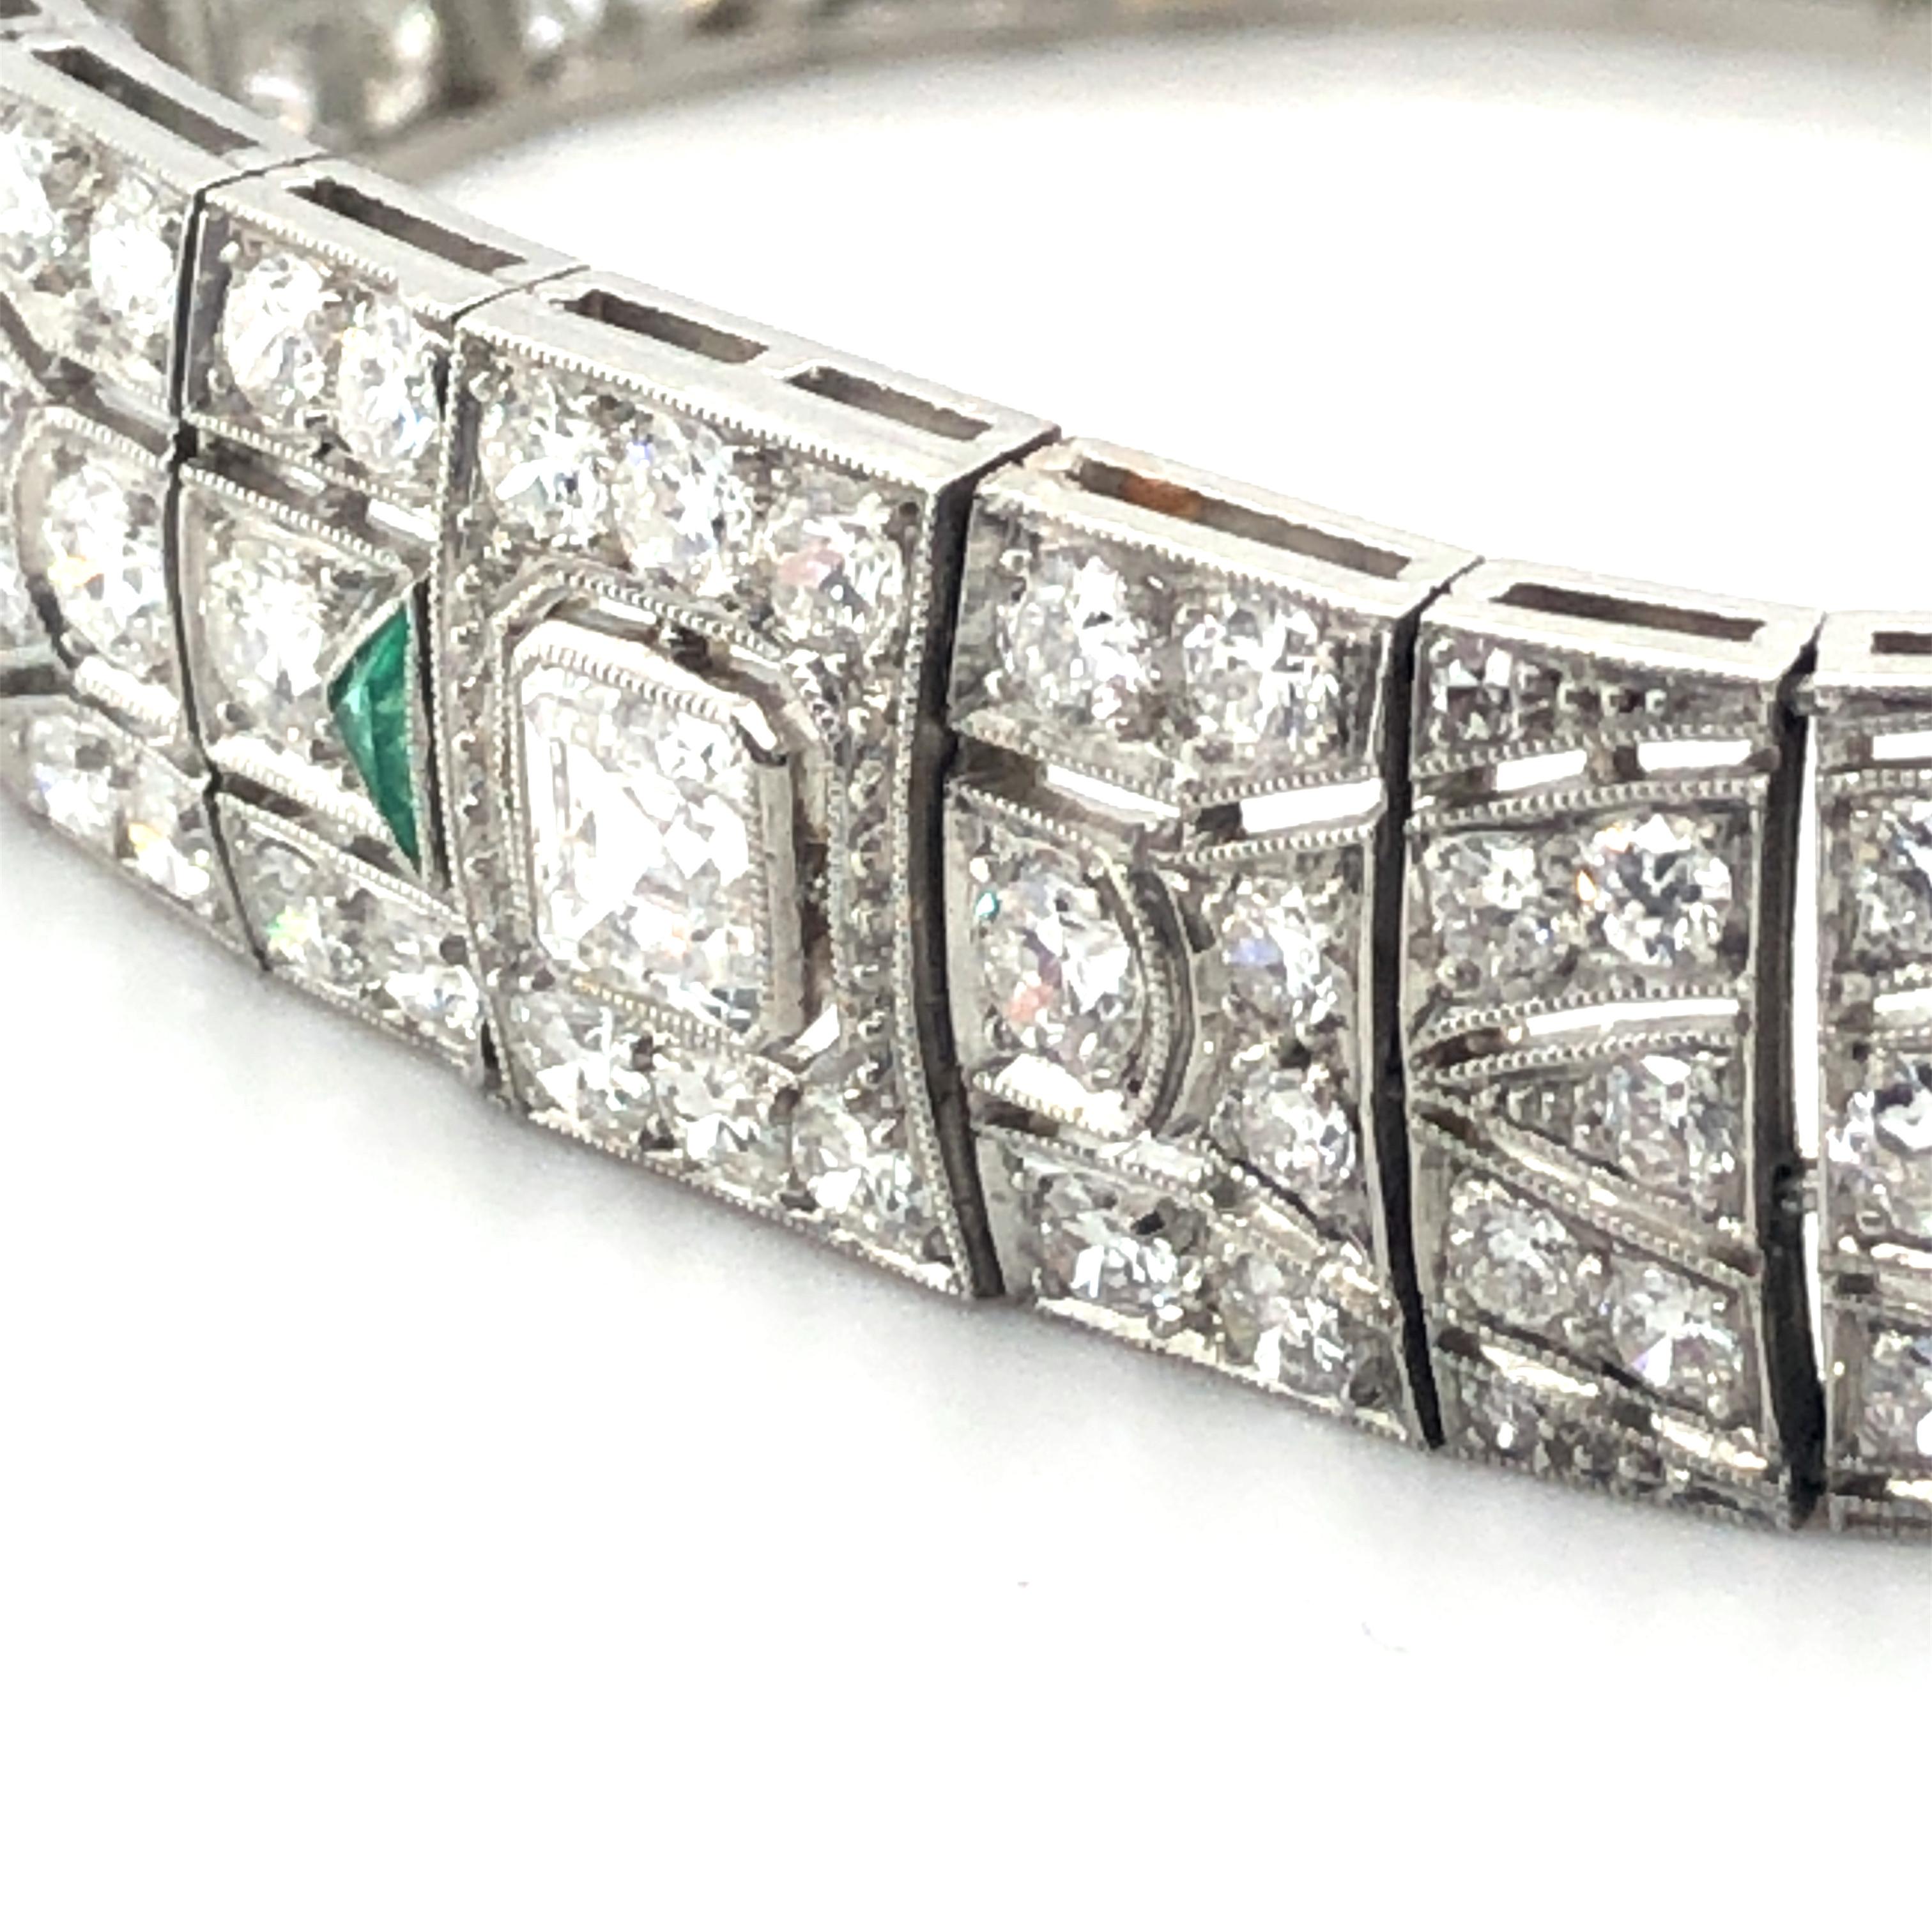 Stunning Diamond and Emerald Art Deco Bracelet in Platinum 950 In Good Condition For Sale In Lucerne, CH